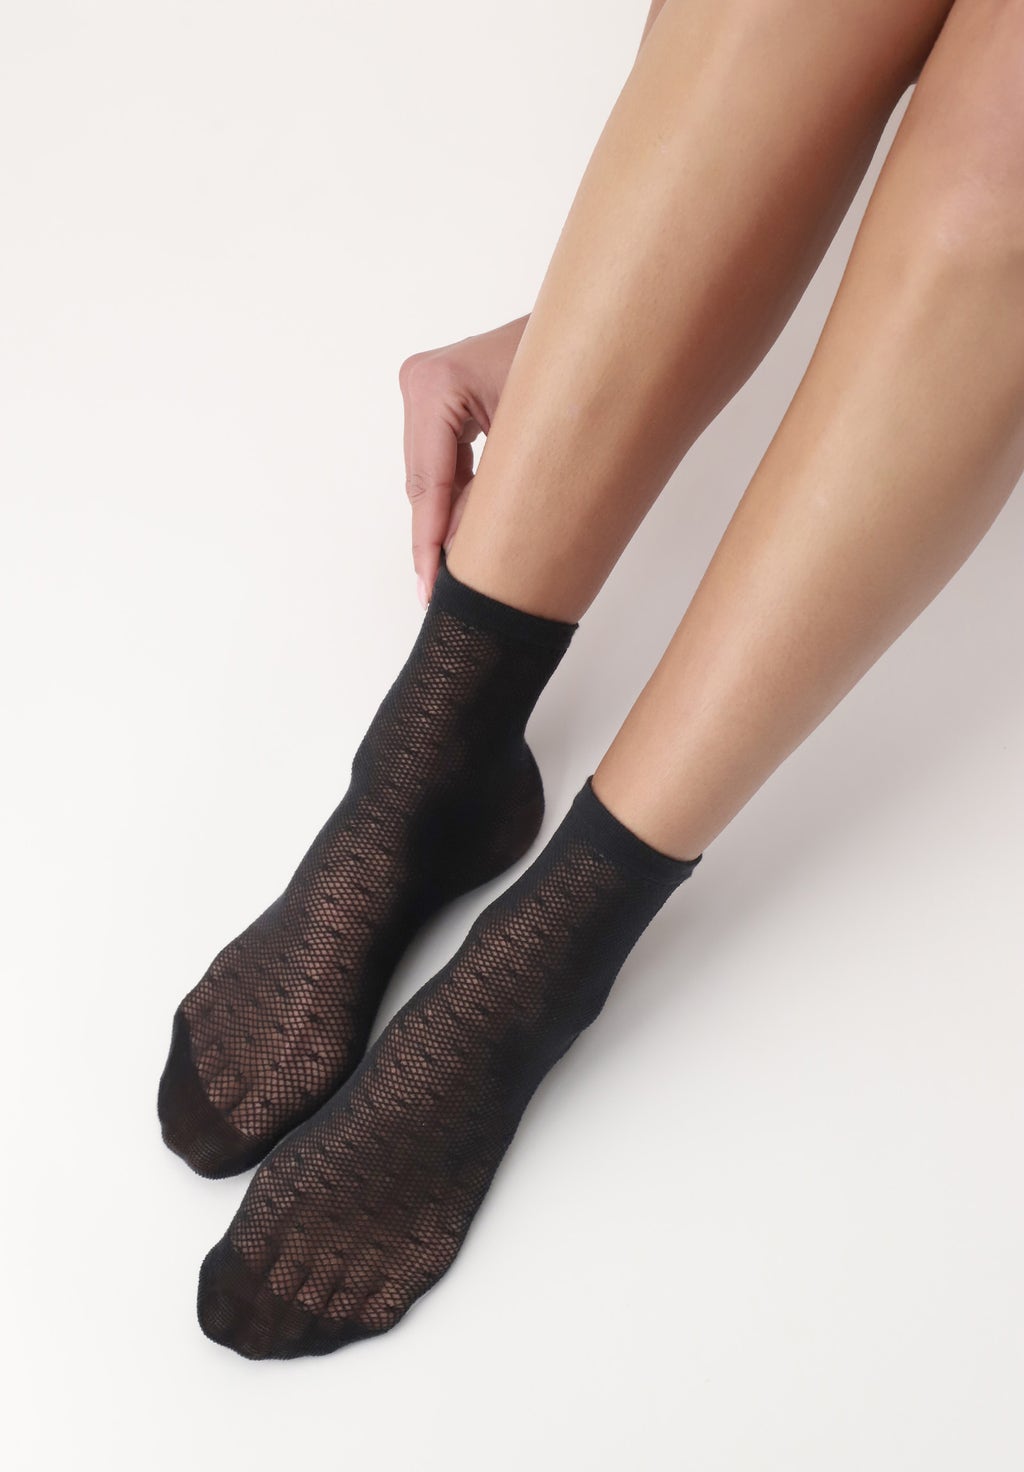 OroblÌ_ Eco Sneaker Sock - Black environmentally friendly fashion quarter high ankle socks made of recycled yarn with a semi-sheer micro-mesh base, woven all over spot pattern, plain under foot, thin cuff and shaped heel.